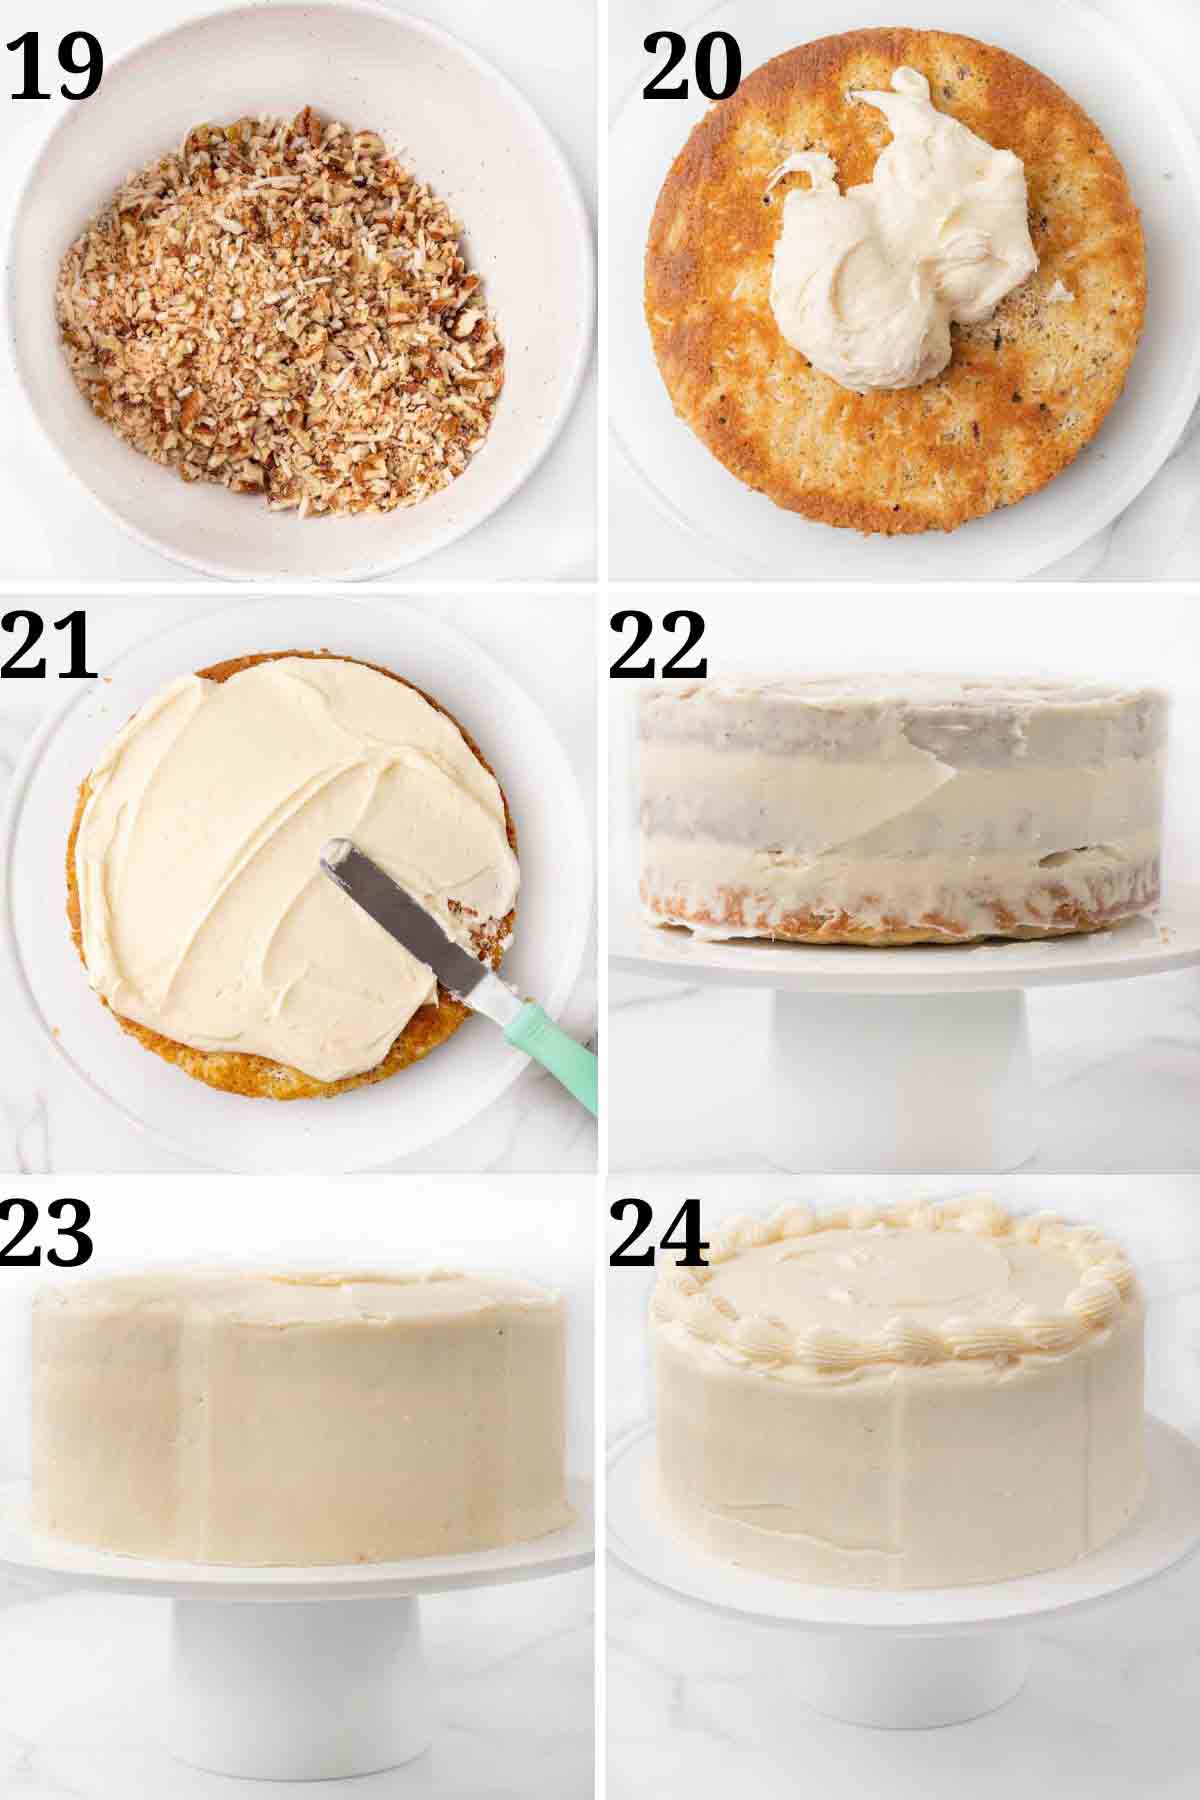 Collage showing how to assemble the Italian Cream Cake.